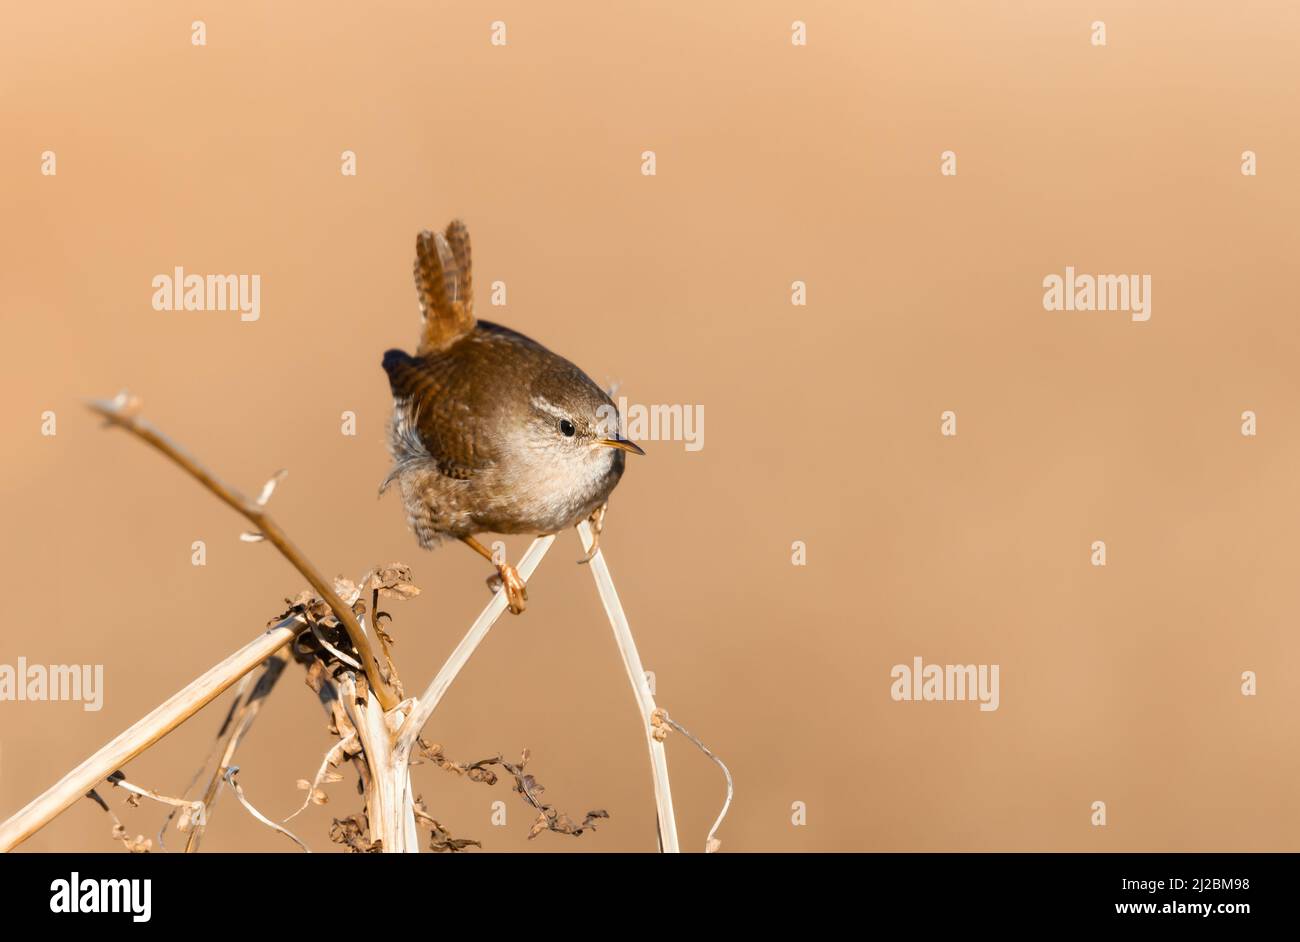 Close up of a wren perched on a fern branch in autumn, UK. Stock Photo